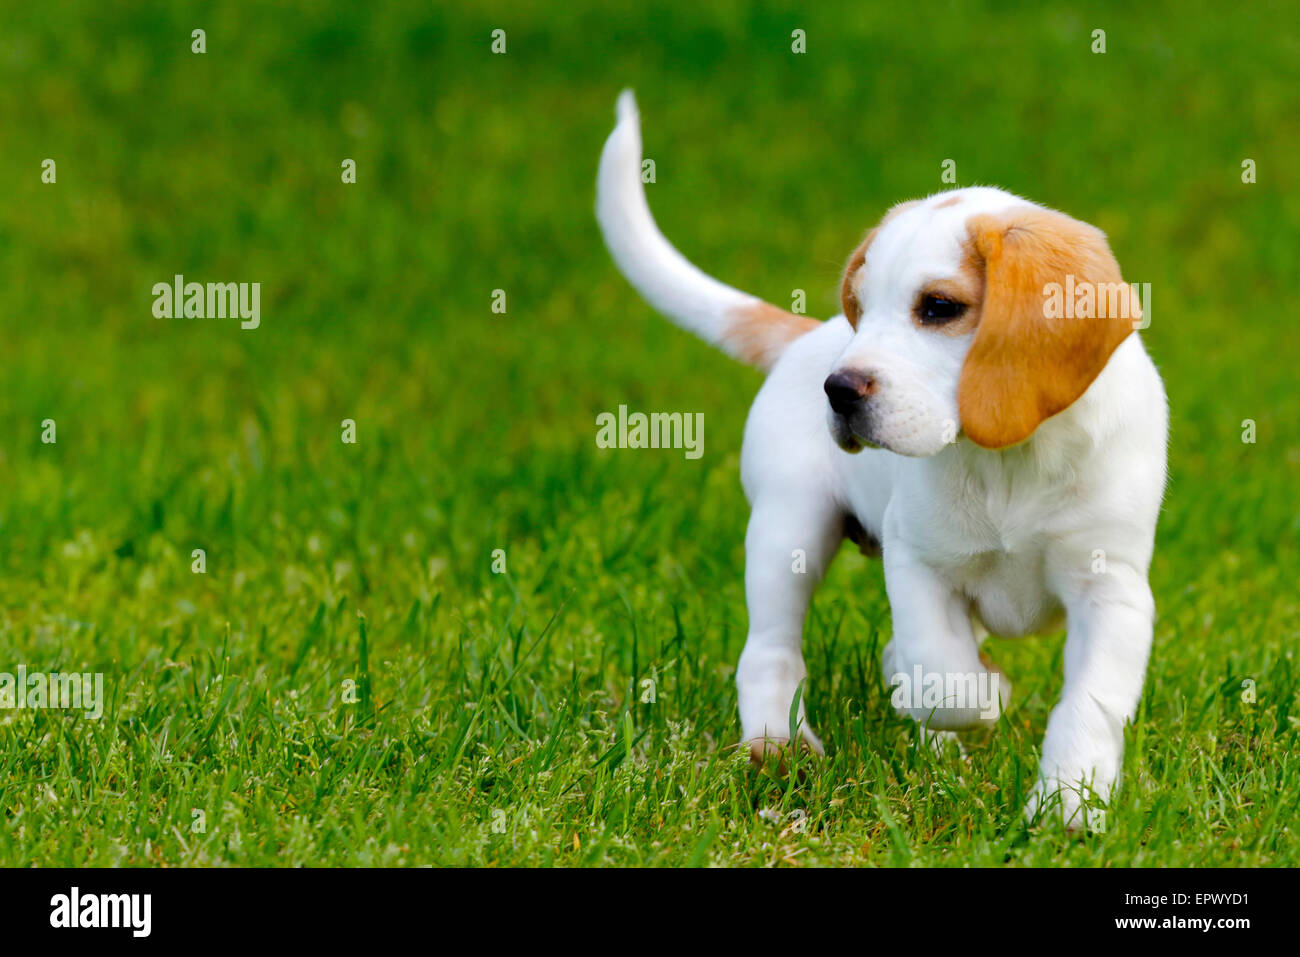 Cute beagle puppy running on the grass. Stock Photo